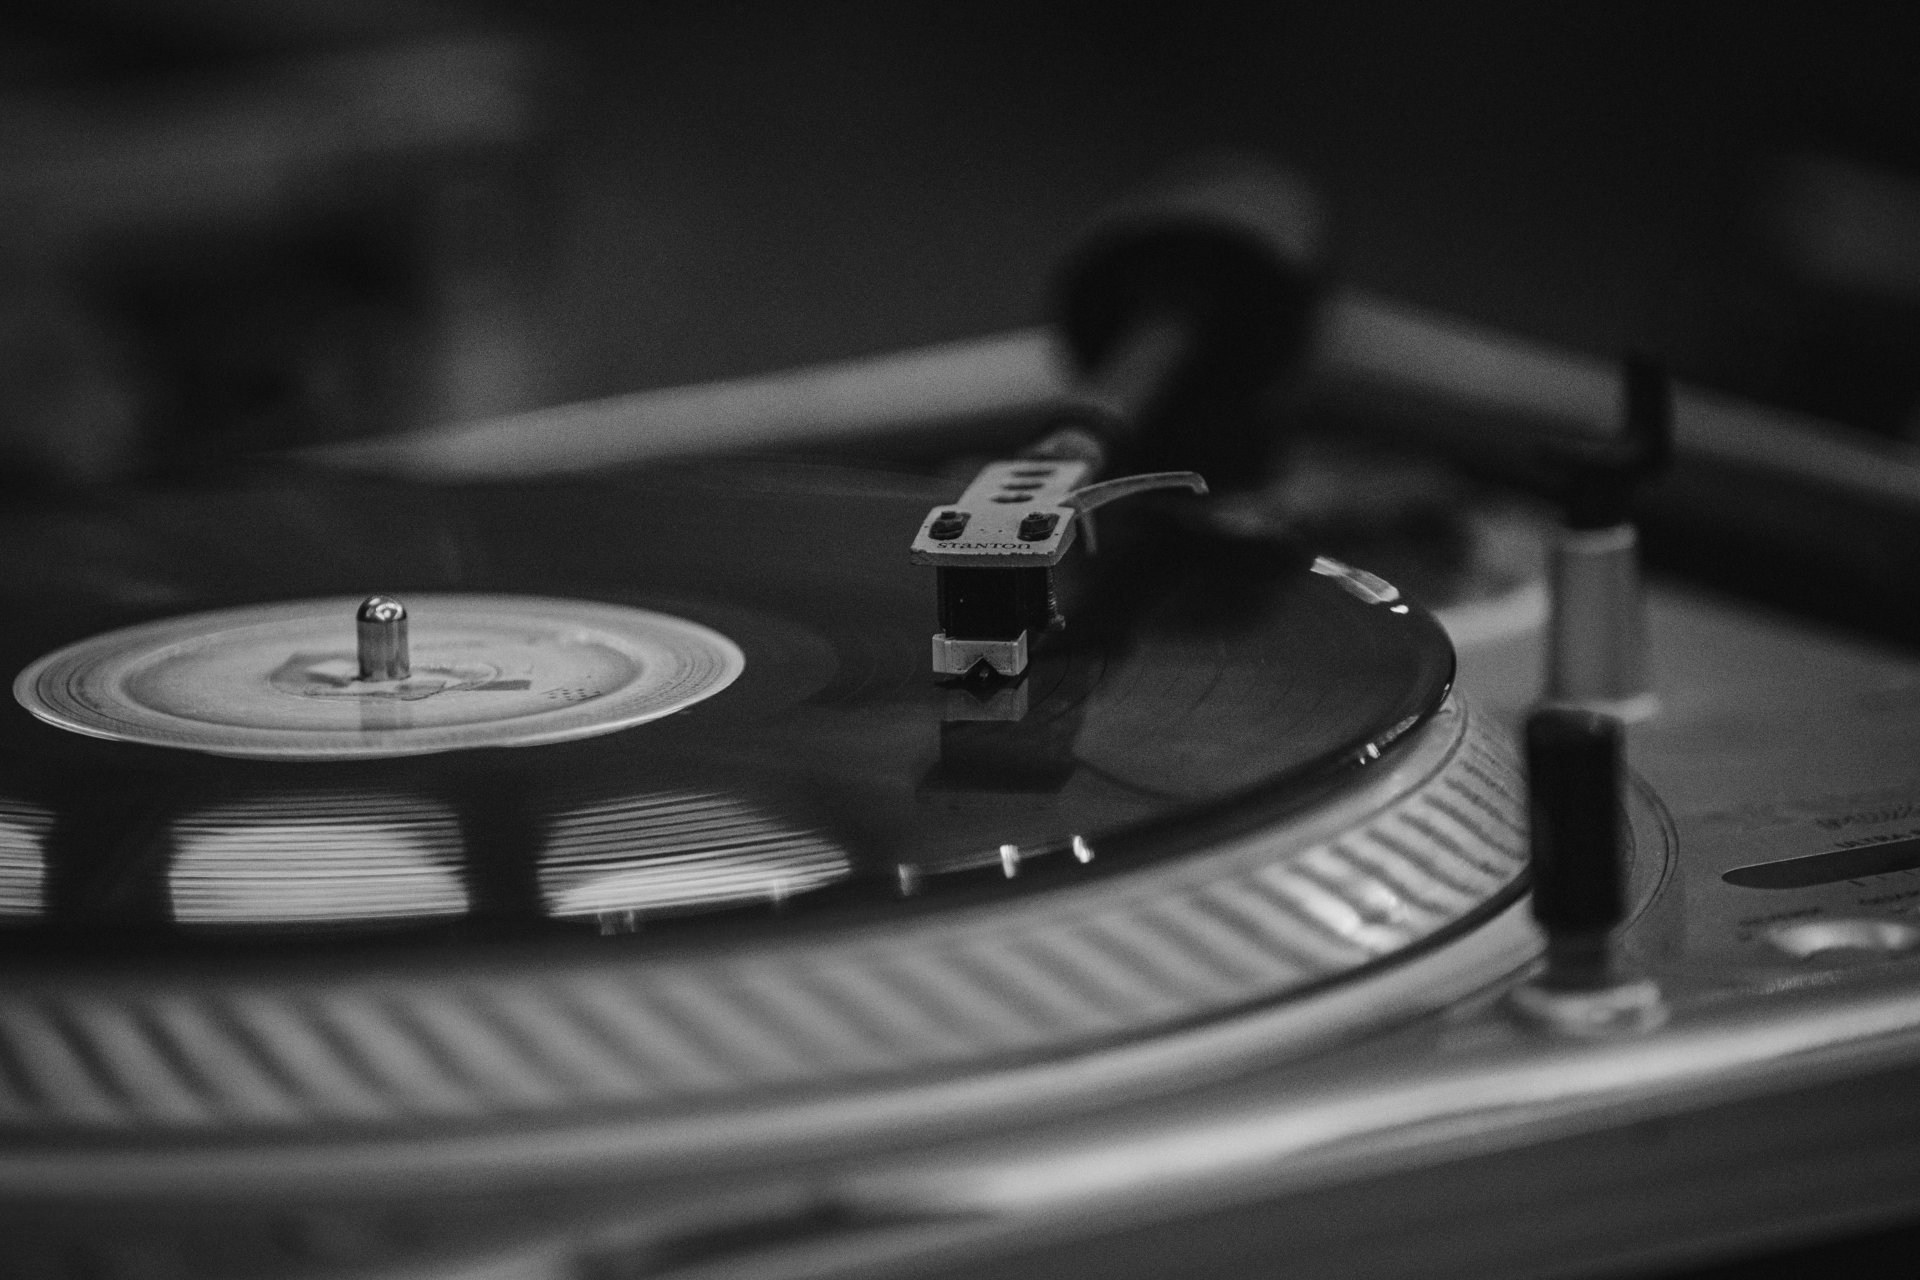 A vinyl record being played on a record player